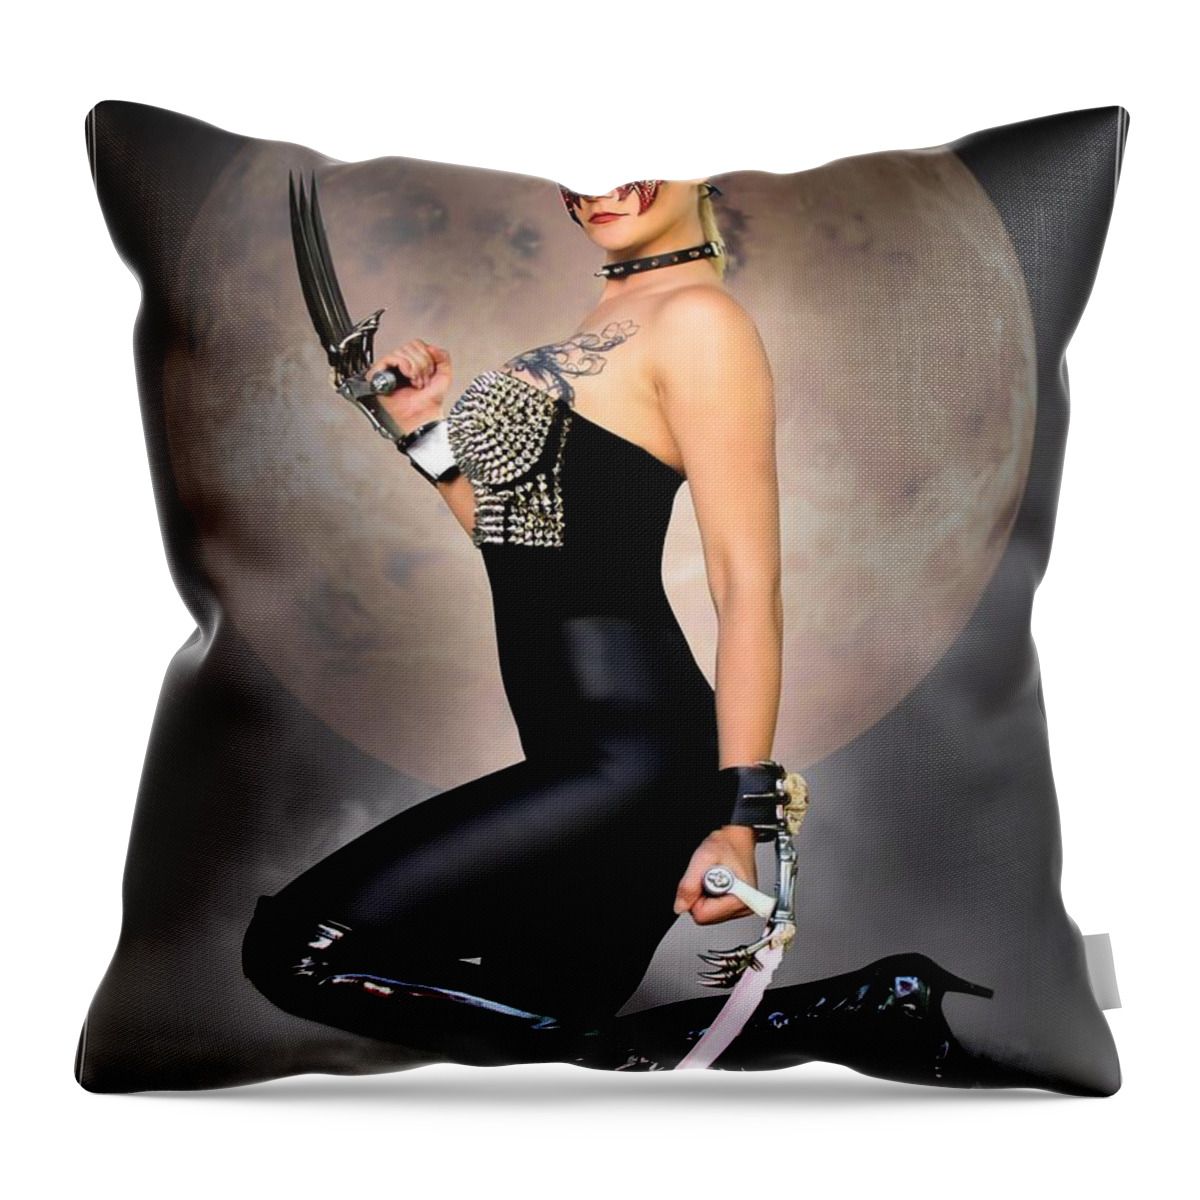 Fantasy Throw Pillow featuring the photograph Bring It On by Jon Volden